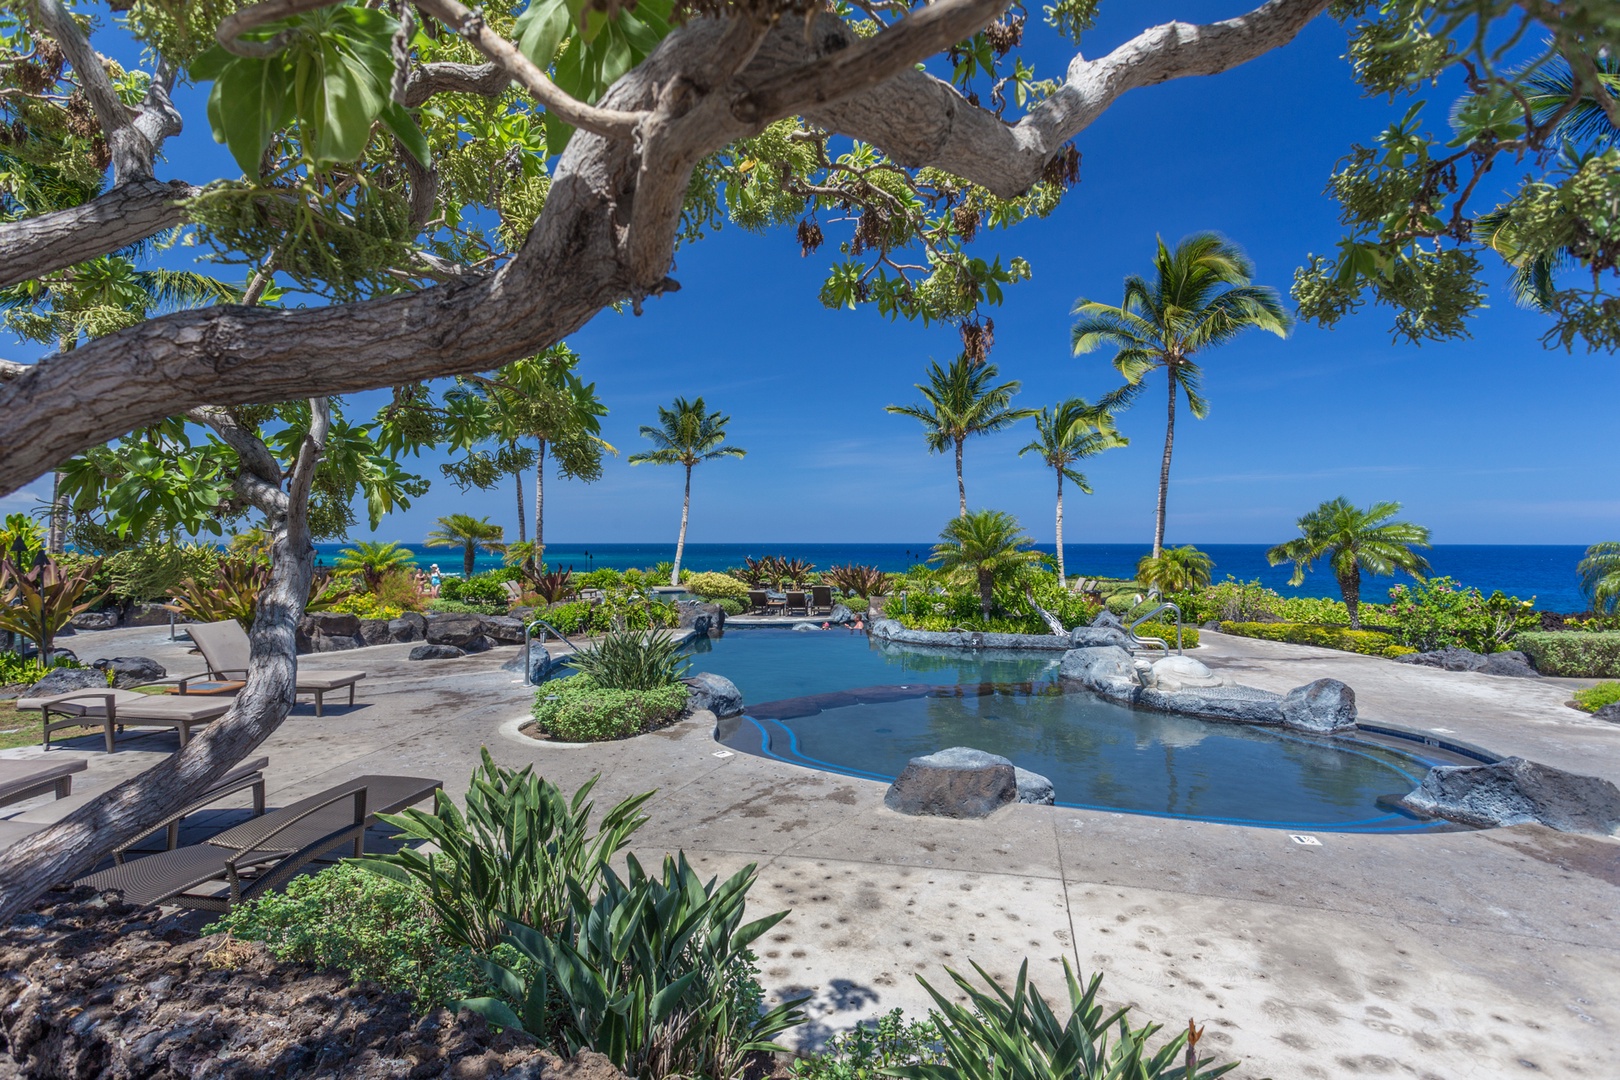 Waikoloa Vacation Rentals, 2BD Hali'i Kai (12C) at Waikoloa Resort - View of just a portion of the oceanfront multi-tiered lagoon style saltwater pool with plentiful loungers.